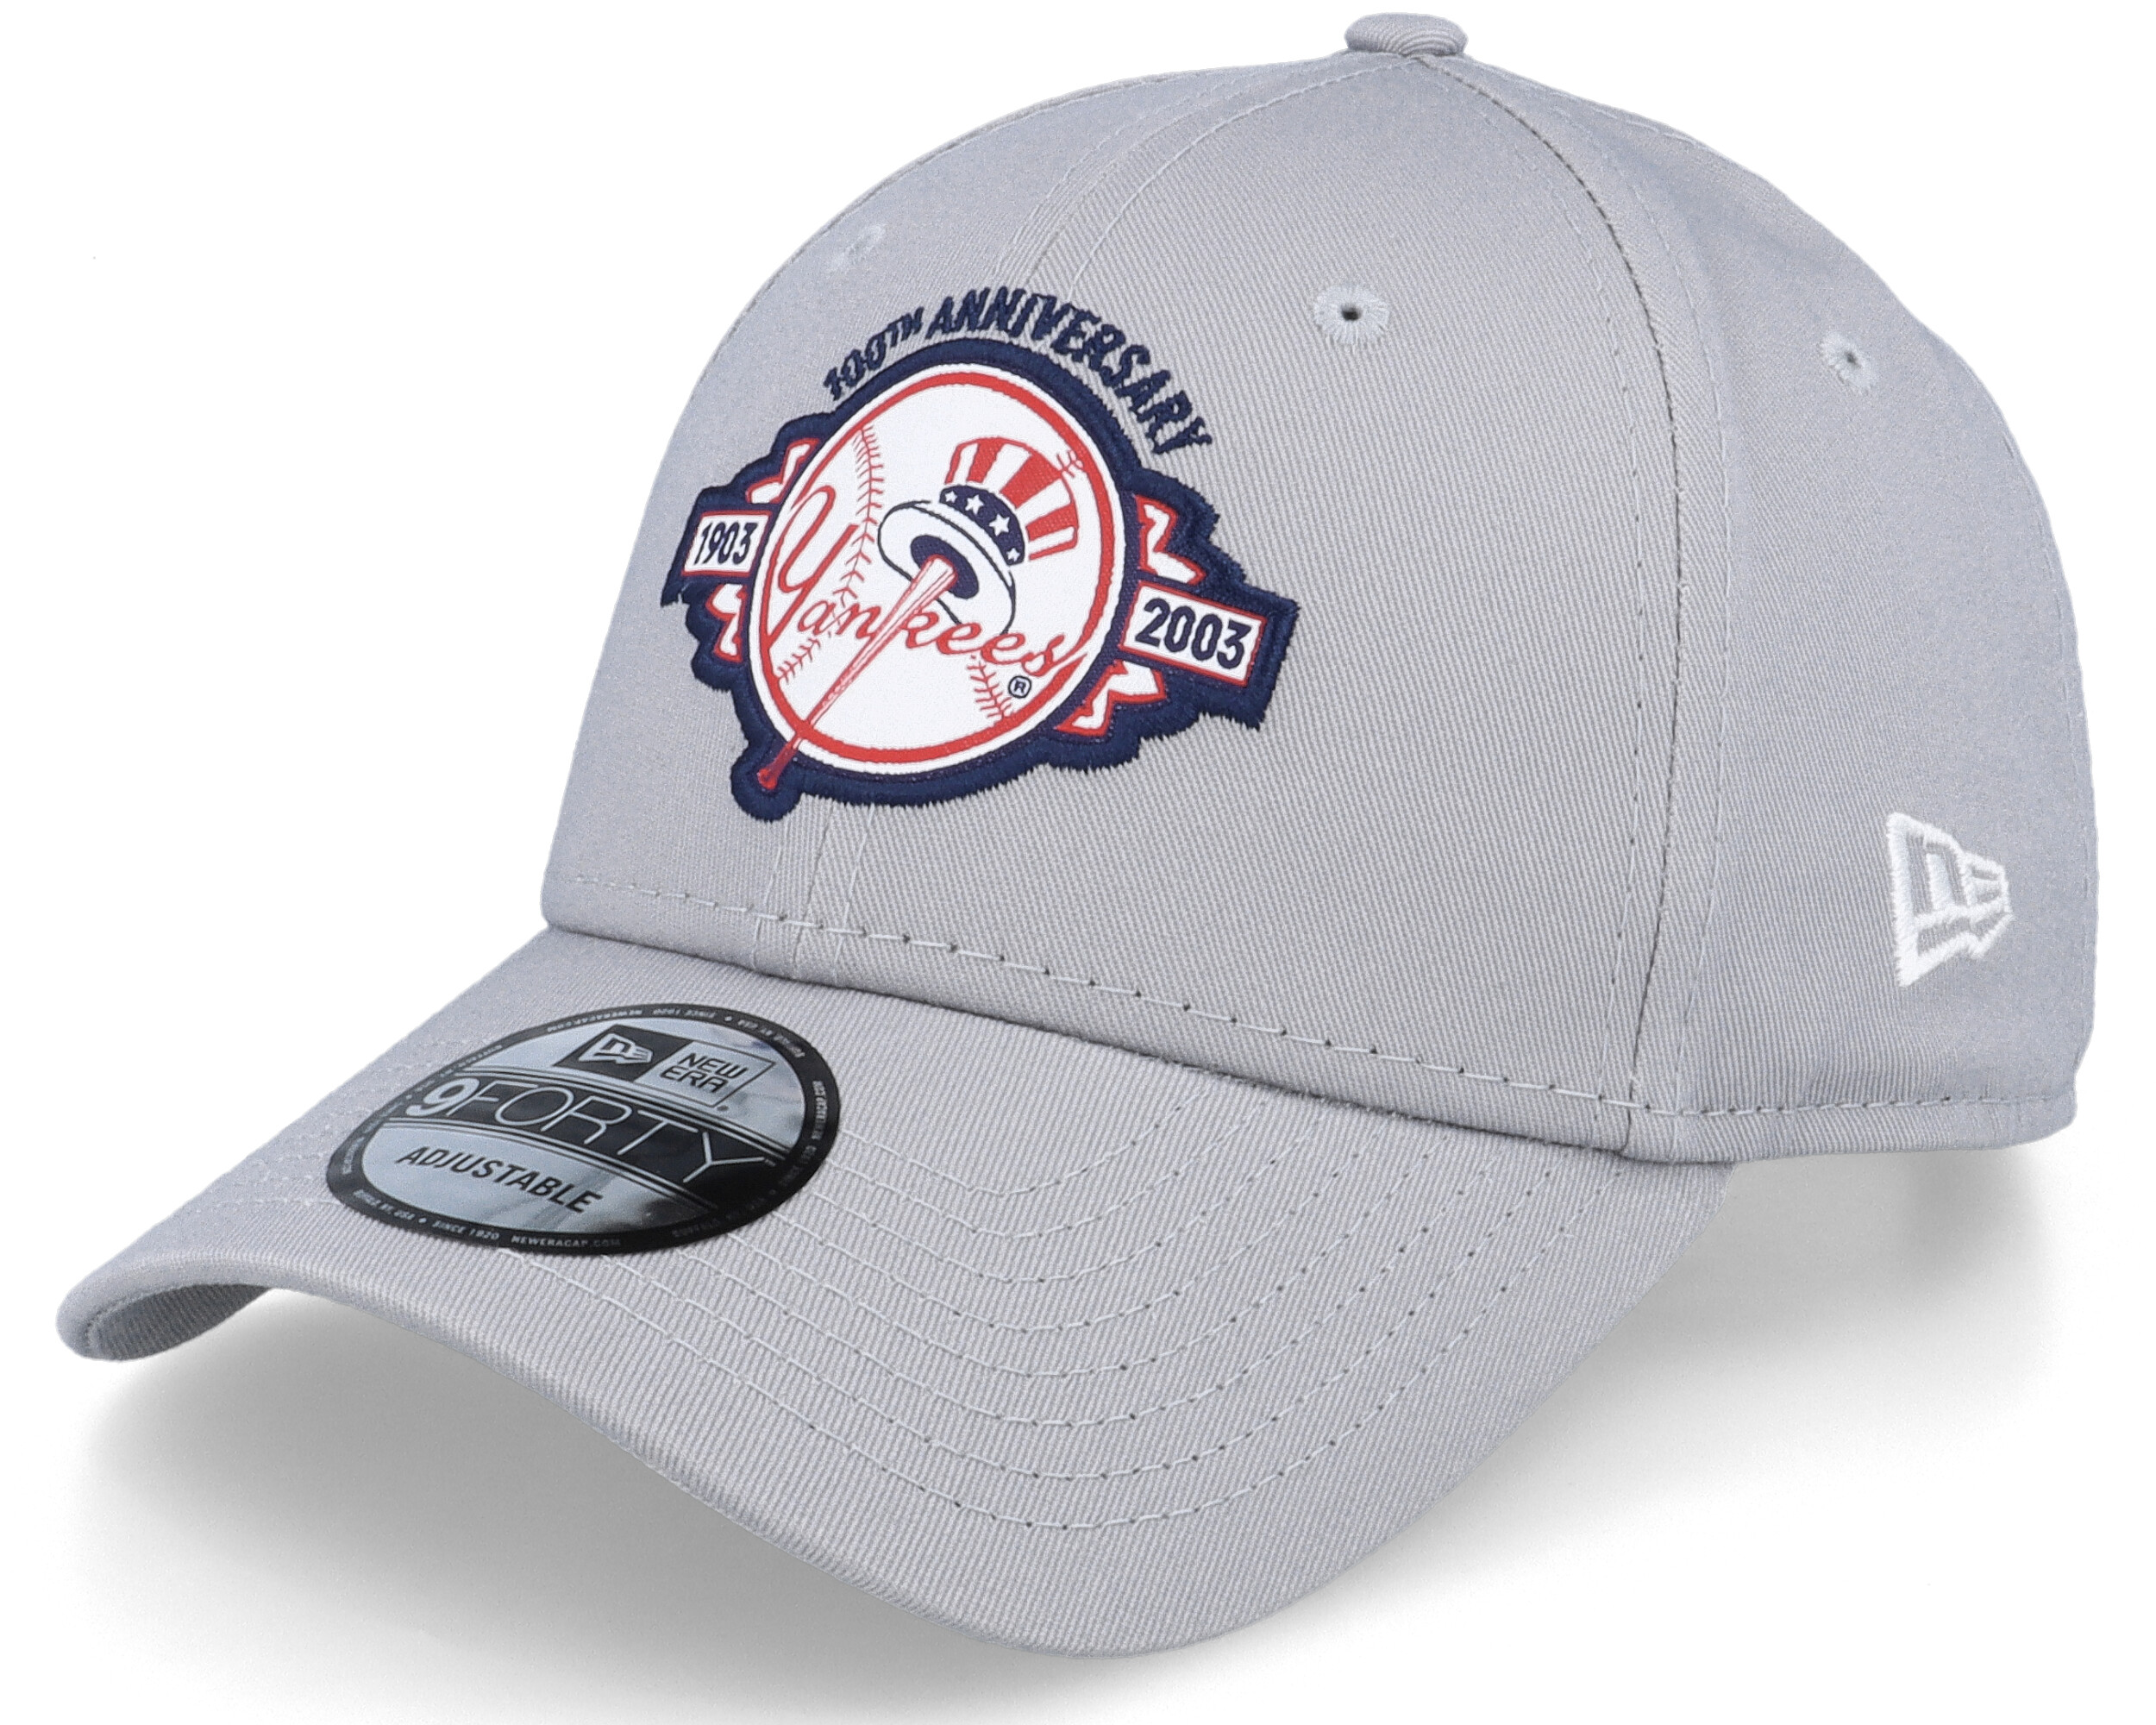 New York Yankees Classic Patch 9FORTY Grey Adjustable New Era cap